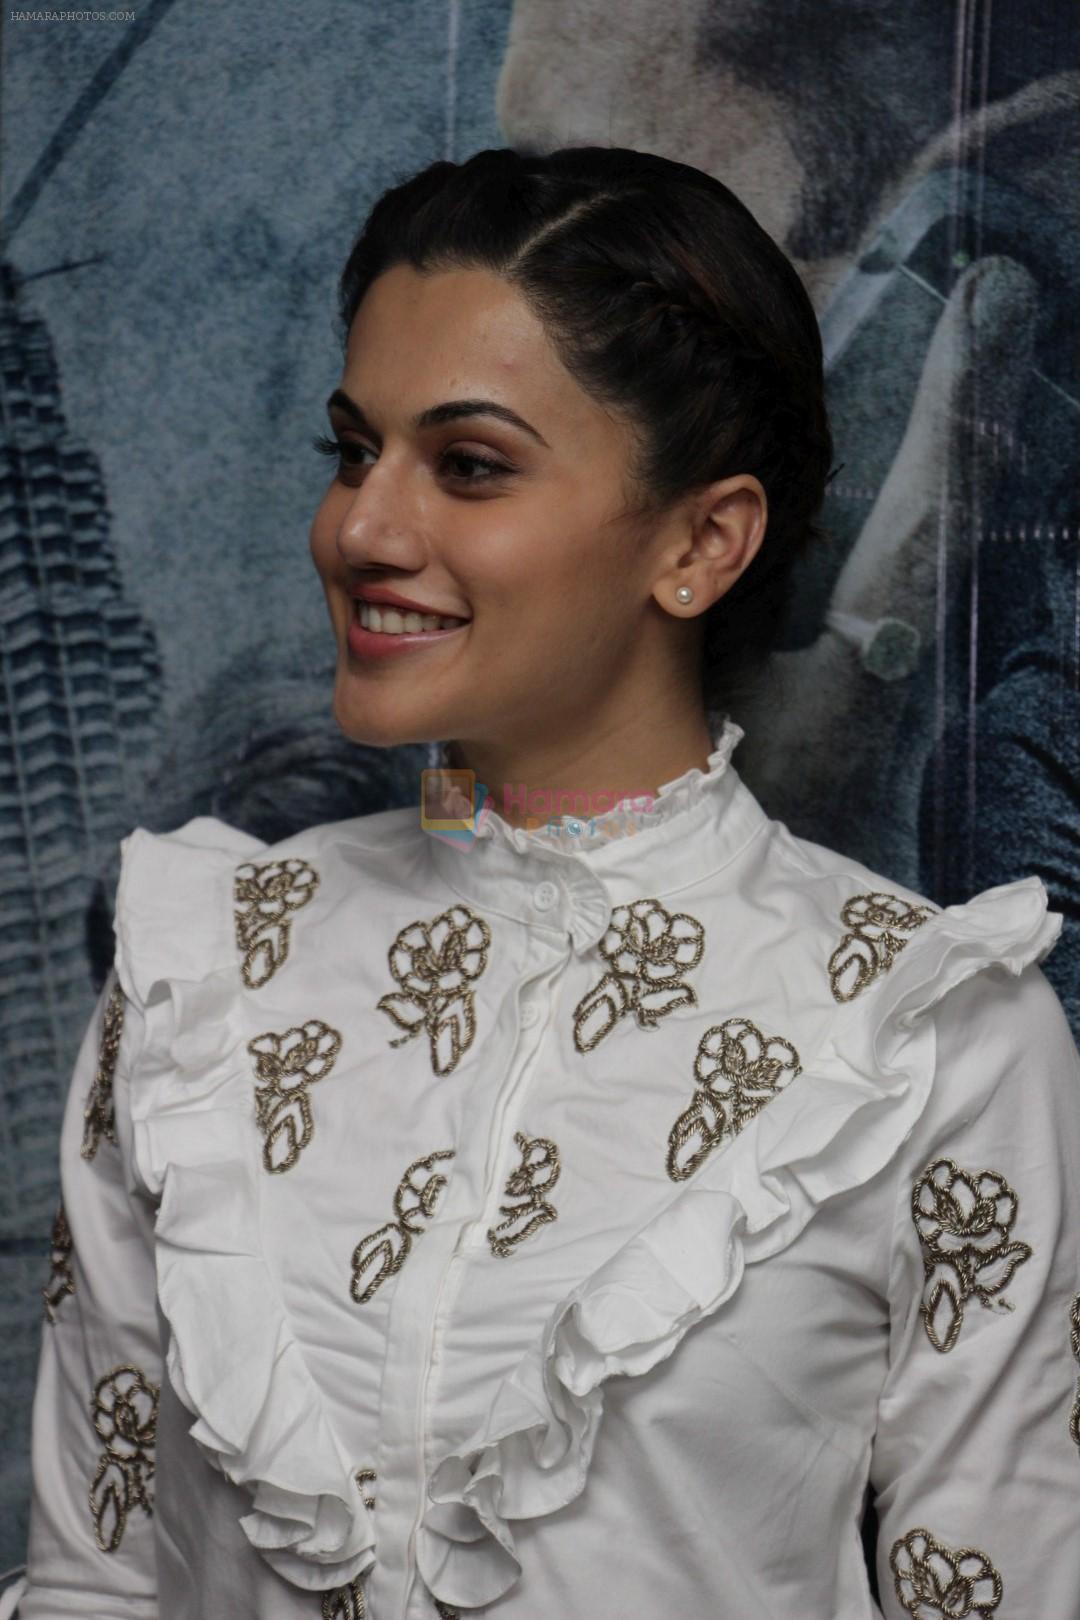 Taapsee Pannu's Training Video And Launch Of New Song Zinda on 11th March 2017